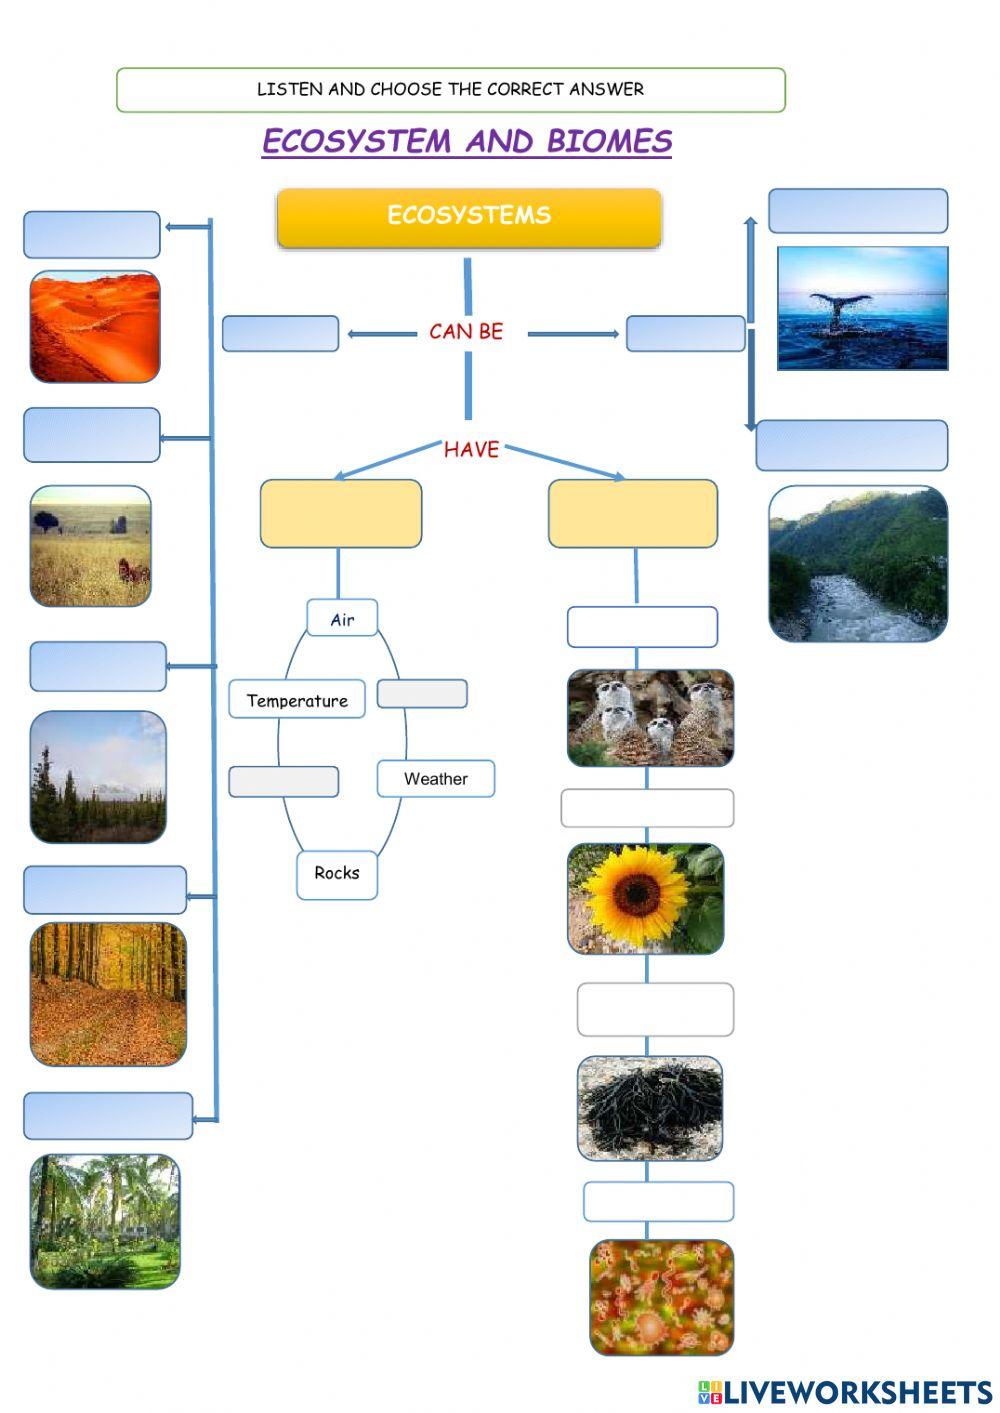 Biomes and ecosystems